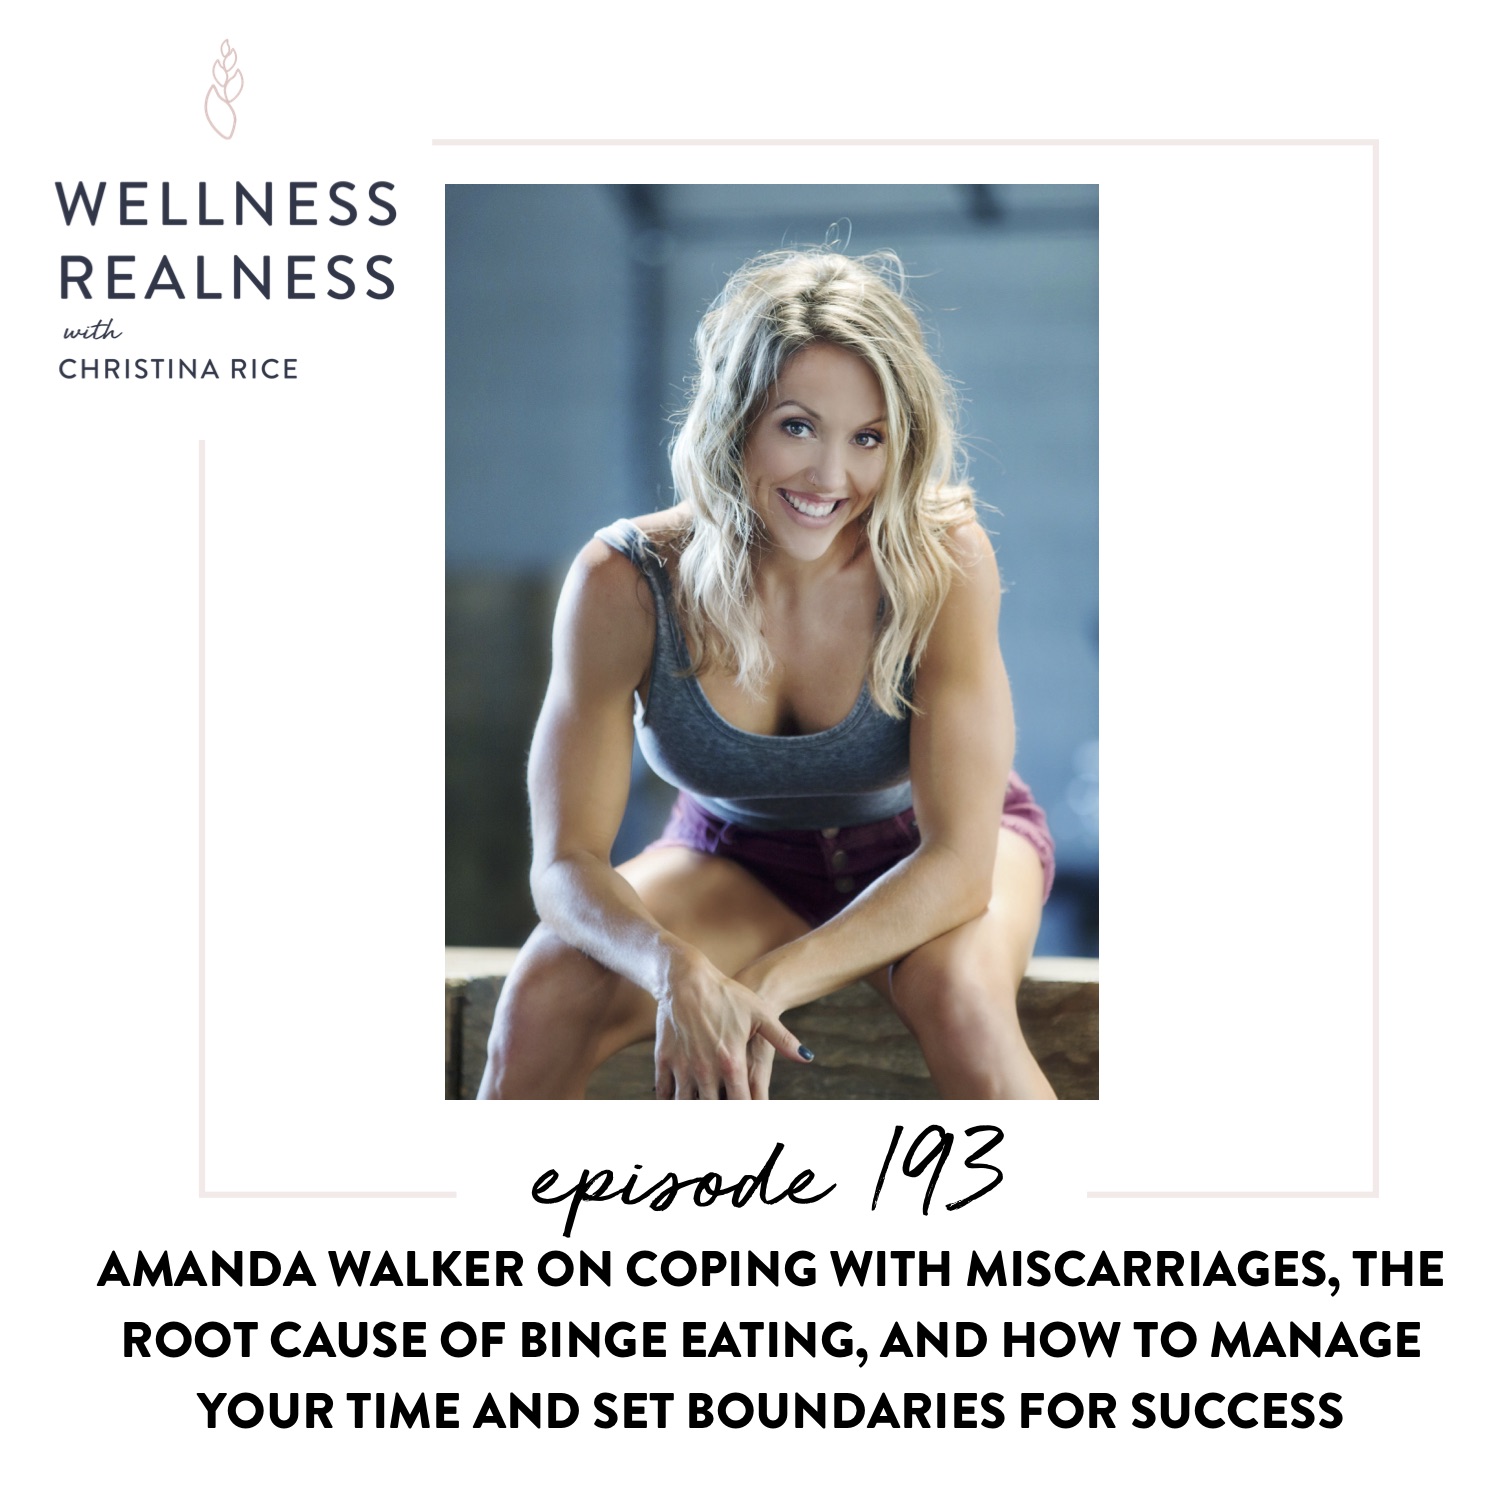 193: Amanda Walker on Coping with Miscarriages, the Root Cause of Binge Eating, and How to Manage Your Time and Set Boundaries for Success